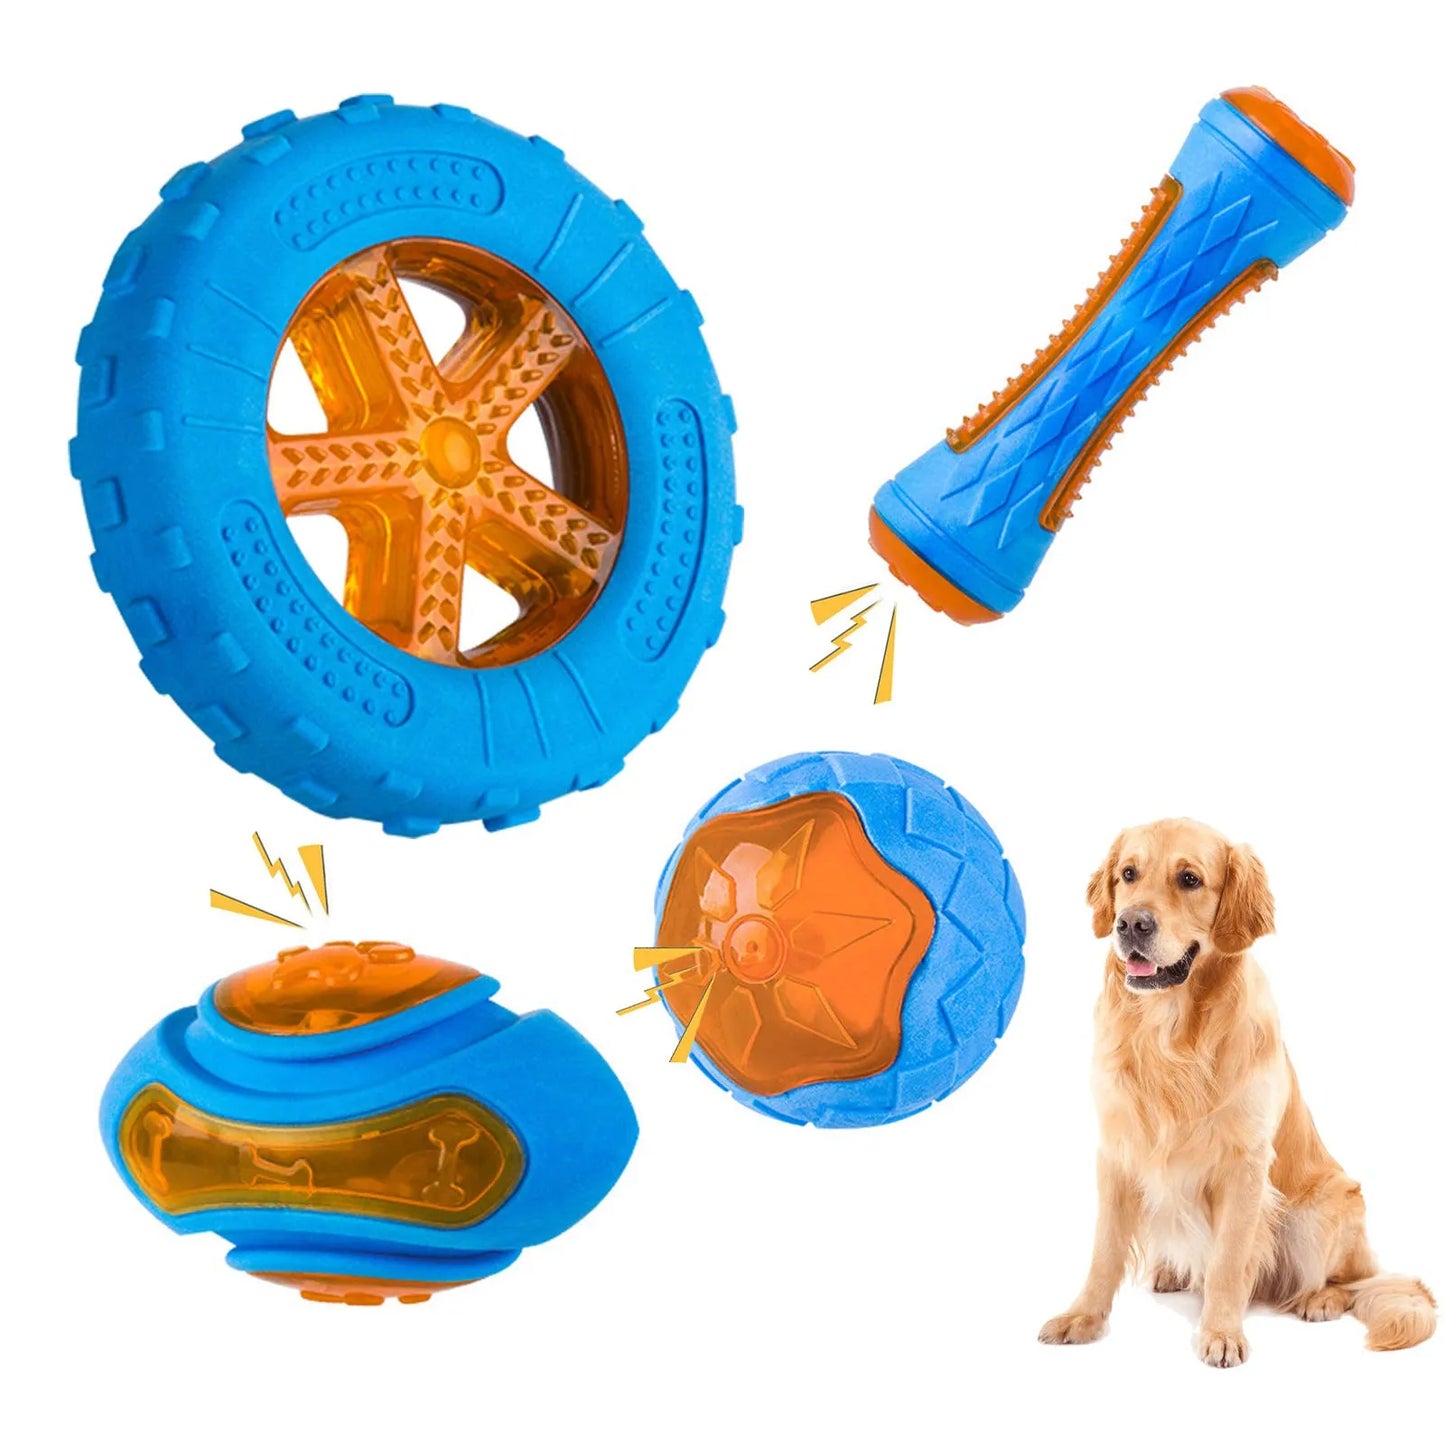 ToughSqueak: Bite-Resistant Rubber Chew Toy for Large Dogs